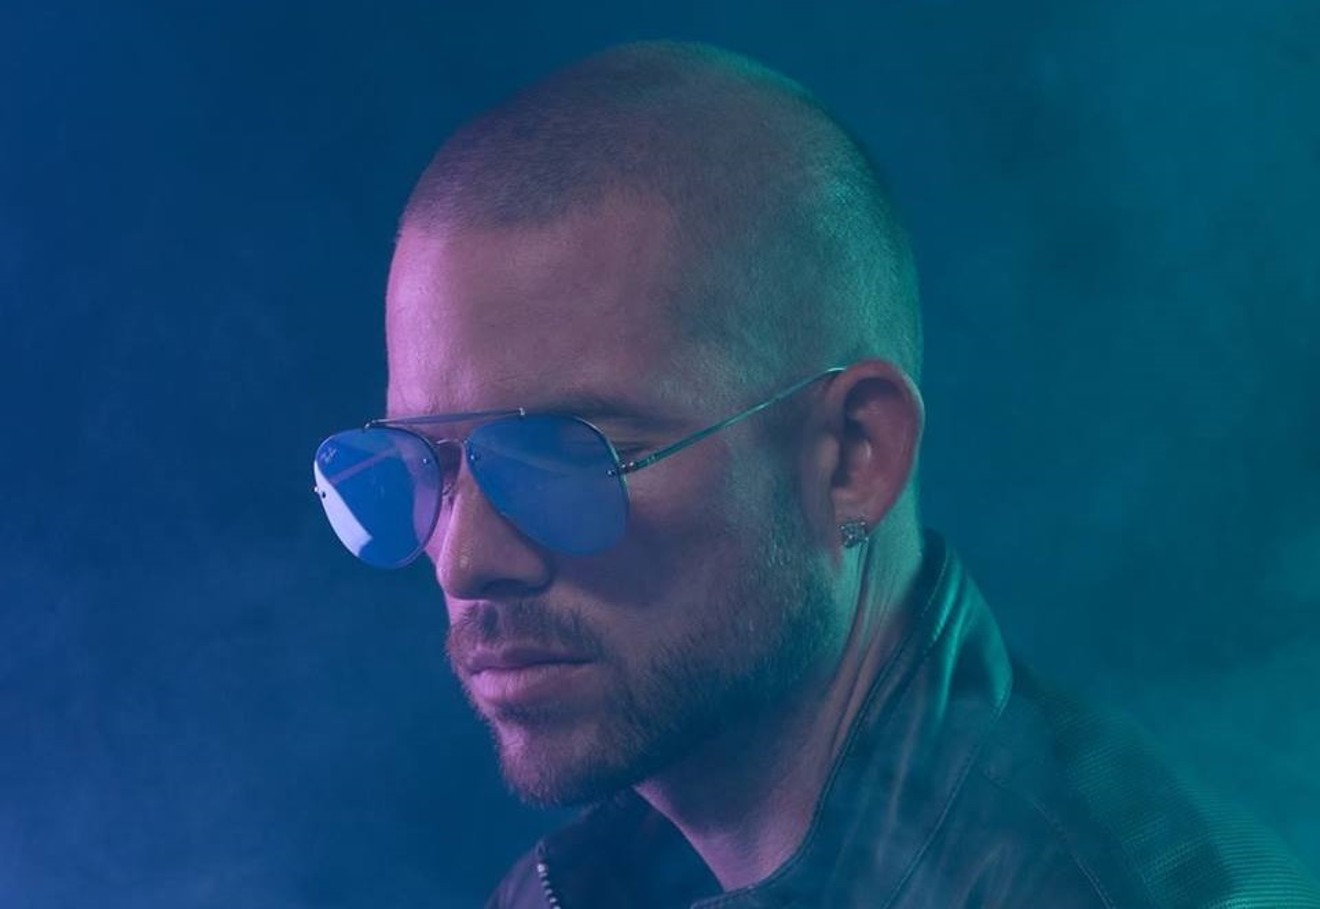 Collie Buddz is scheduled to perform on Sunday, February 10, at Arizona Roots Festival at Rawhide in Chandler.